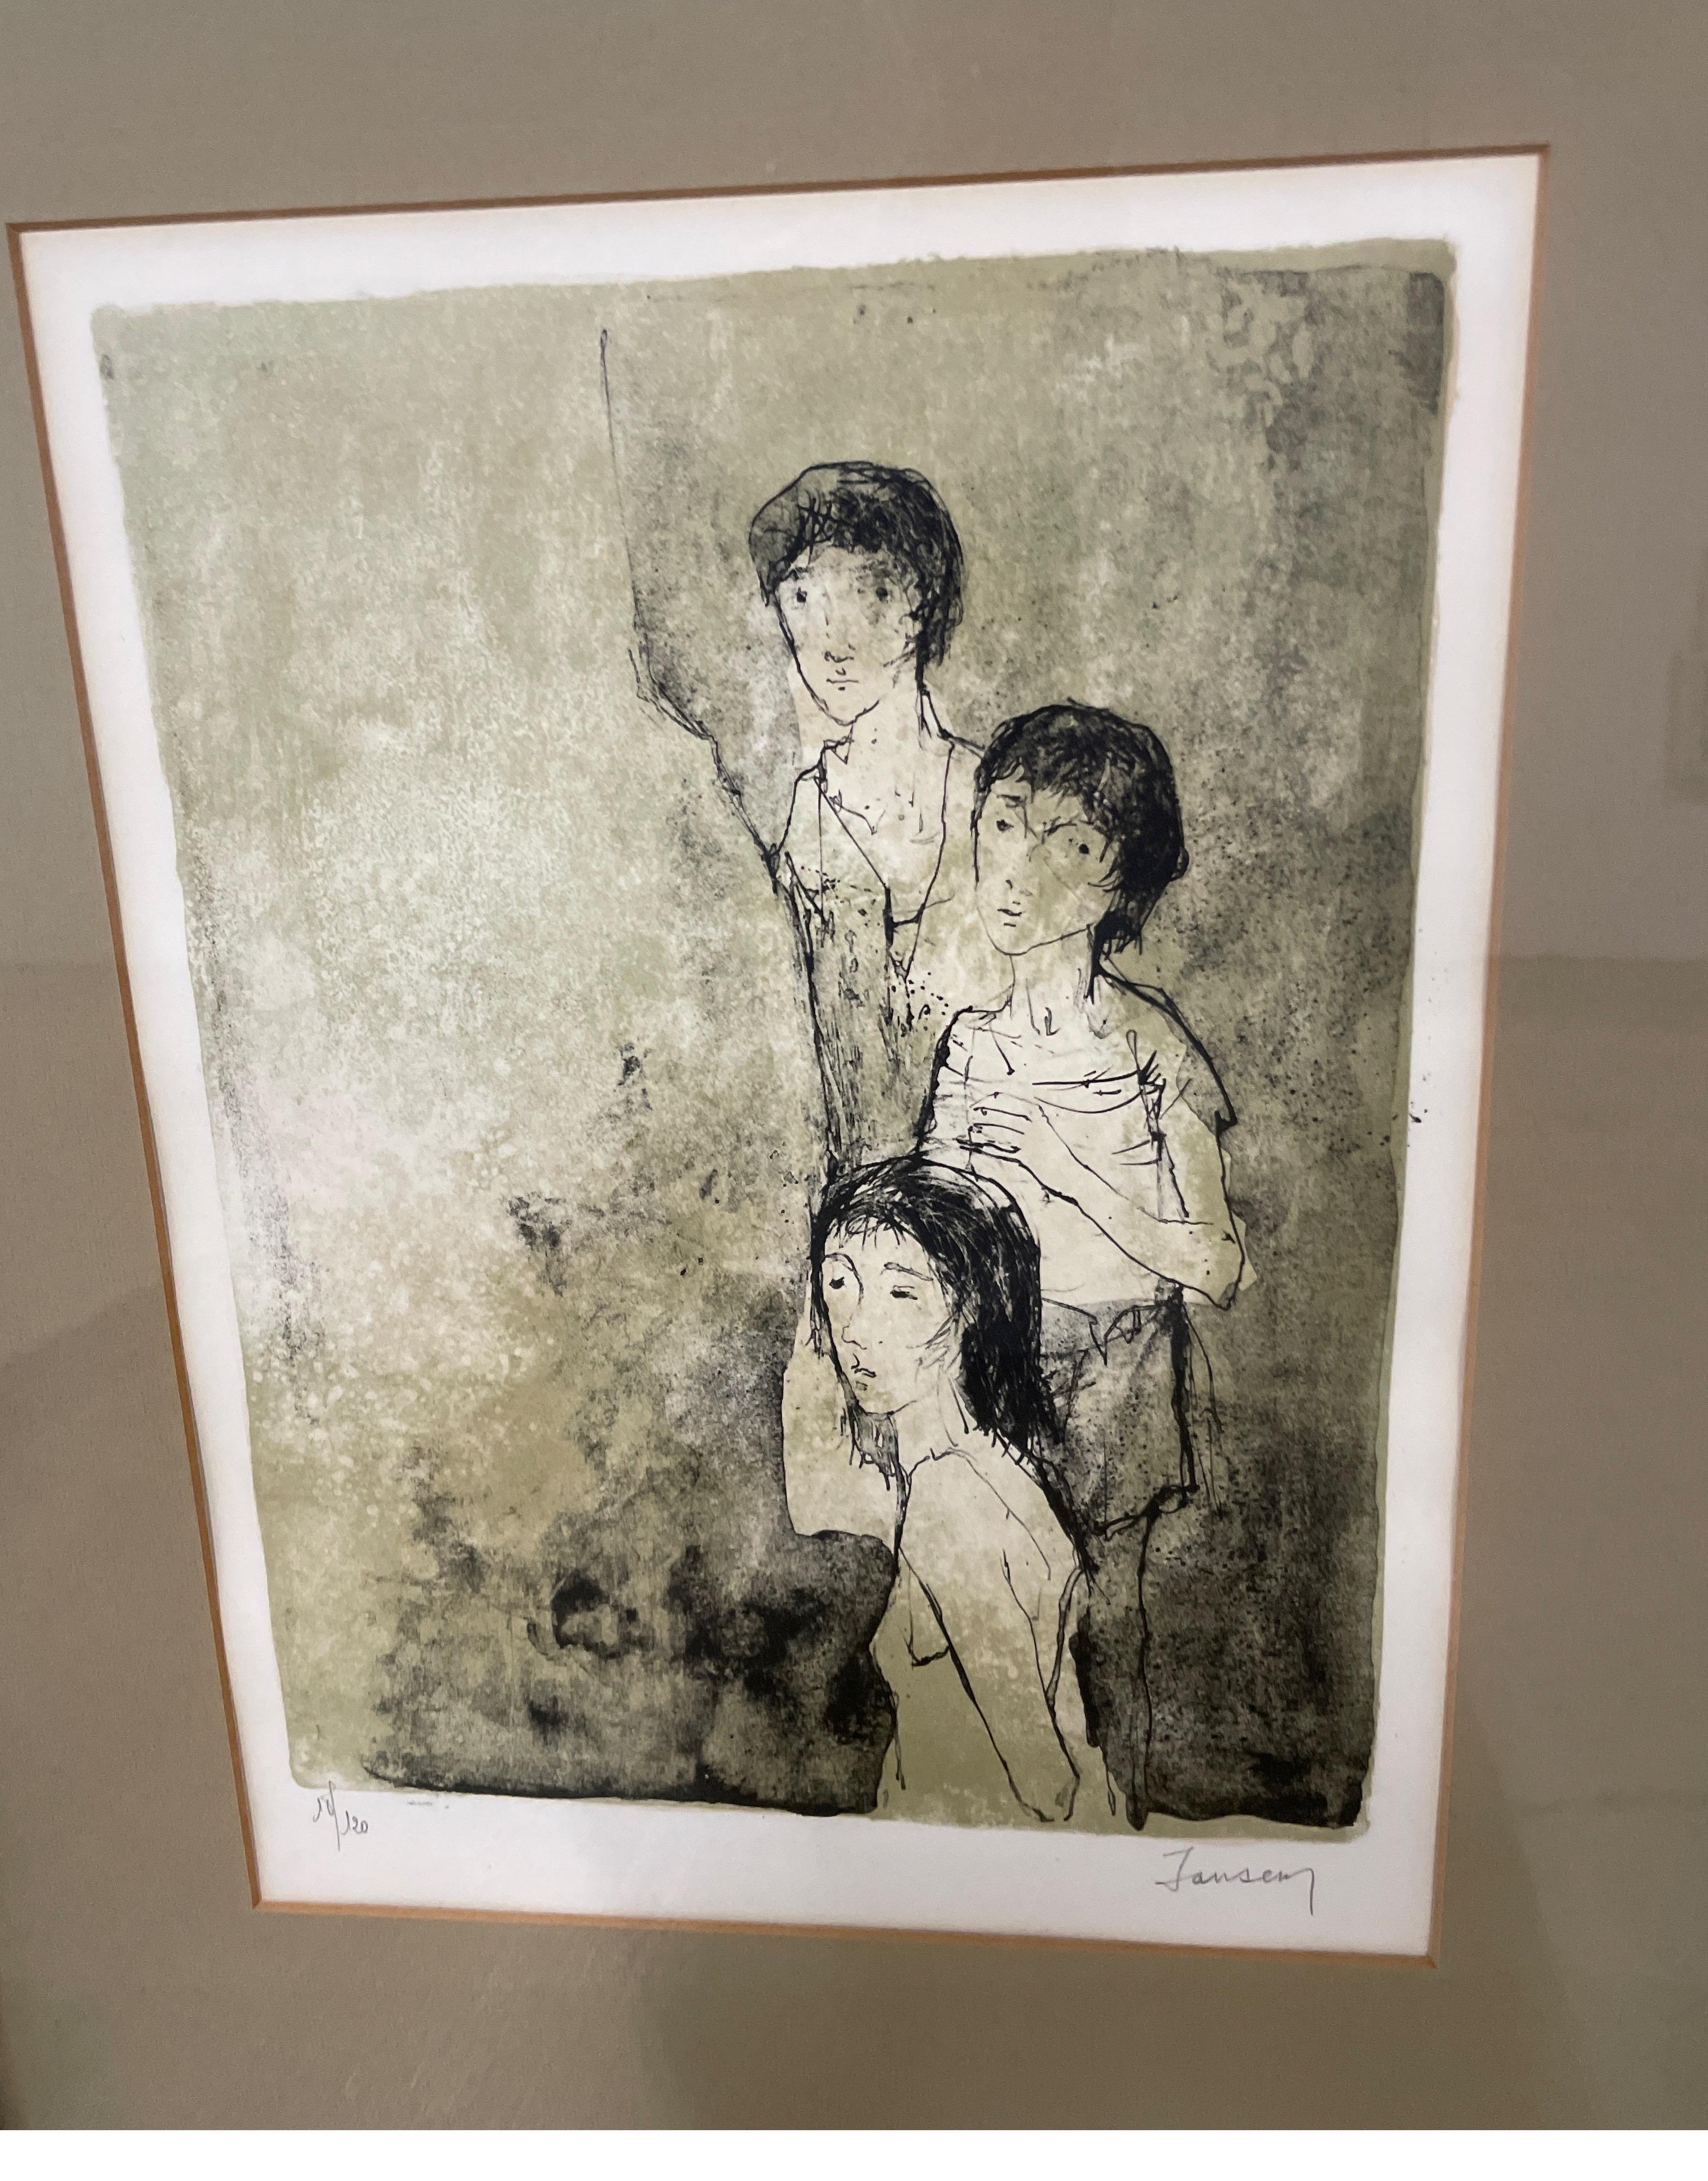 Limited Edition Lithograph of Three Figures by Jean Jansem In Good Condition For Sale In West Palm Beach, FL